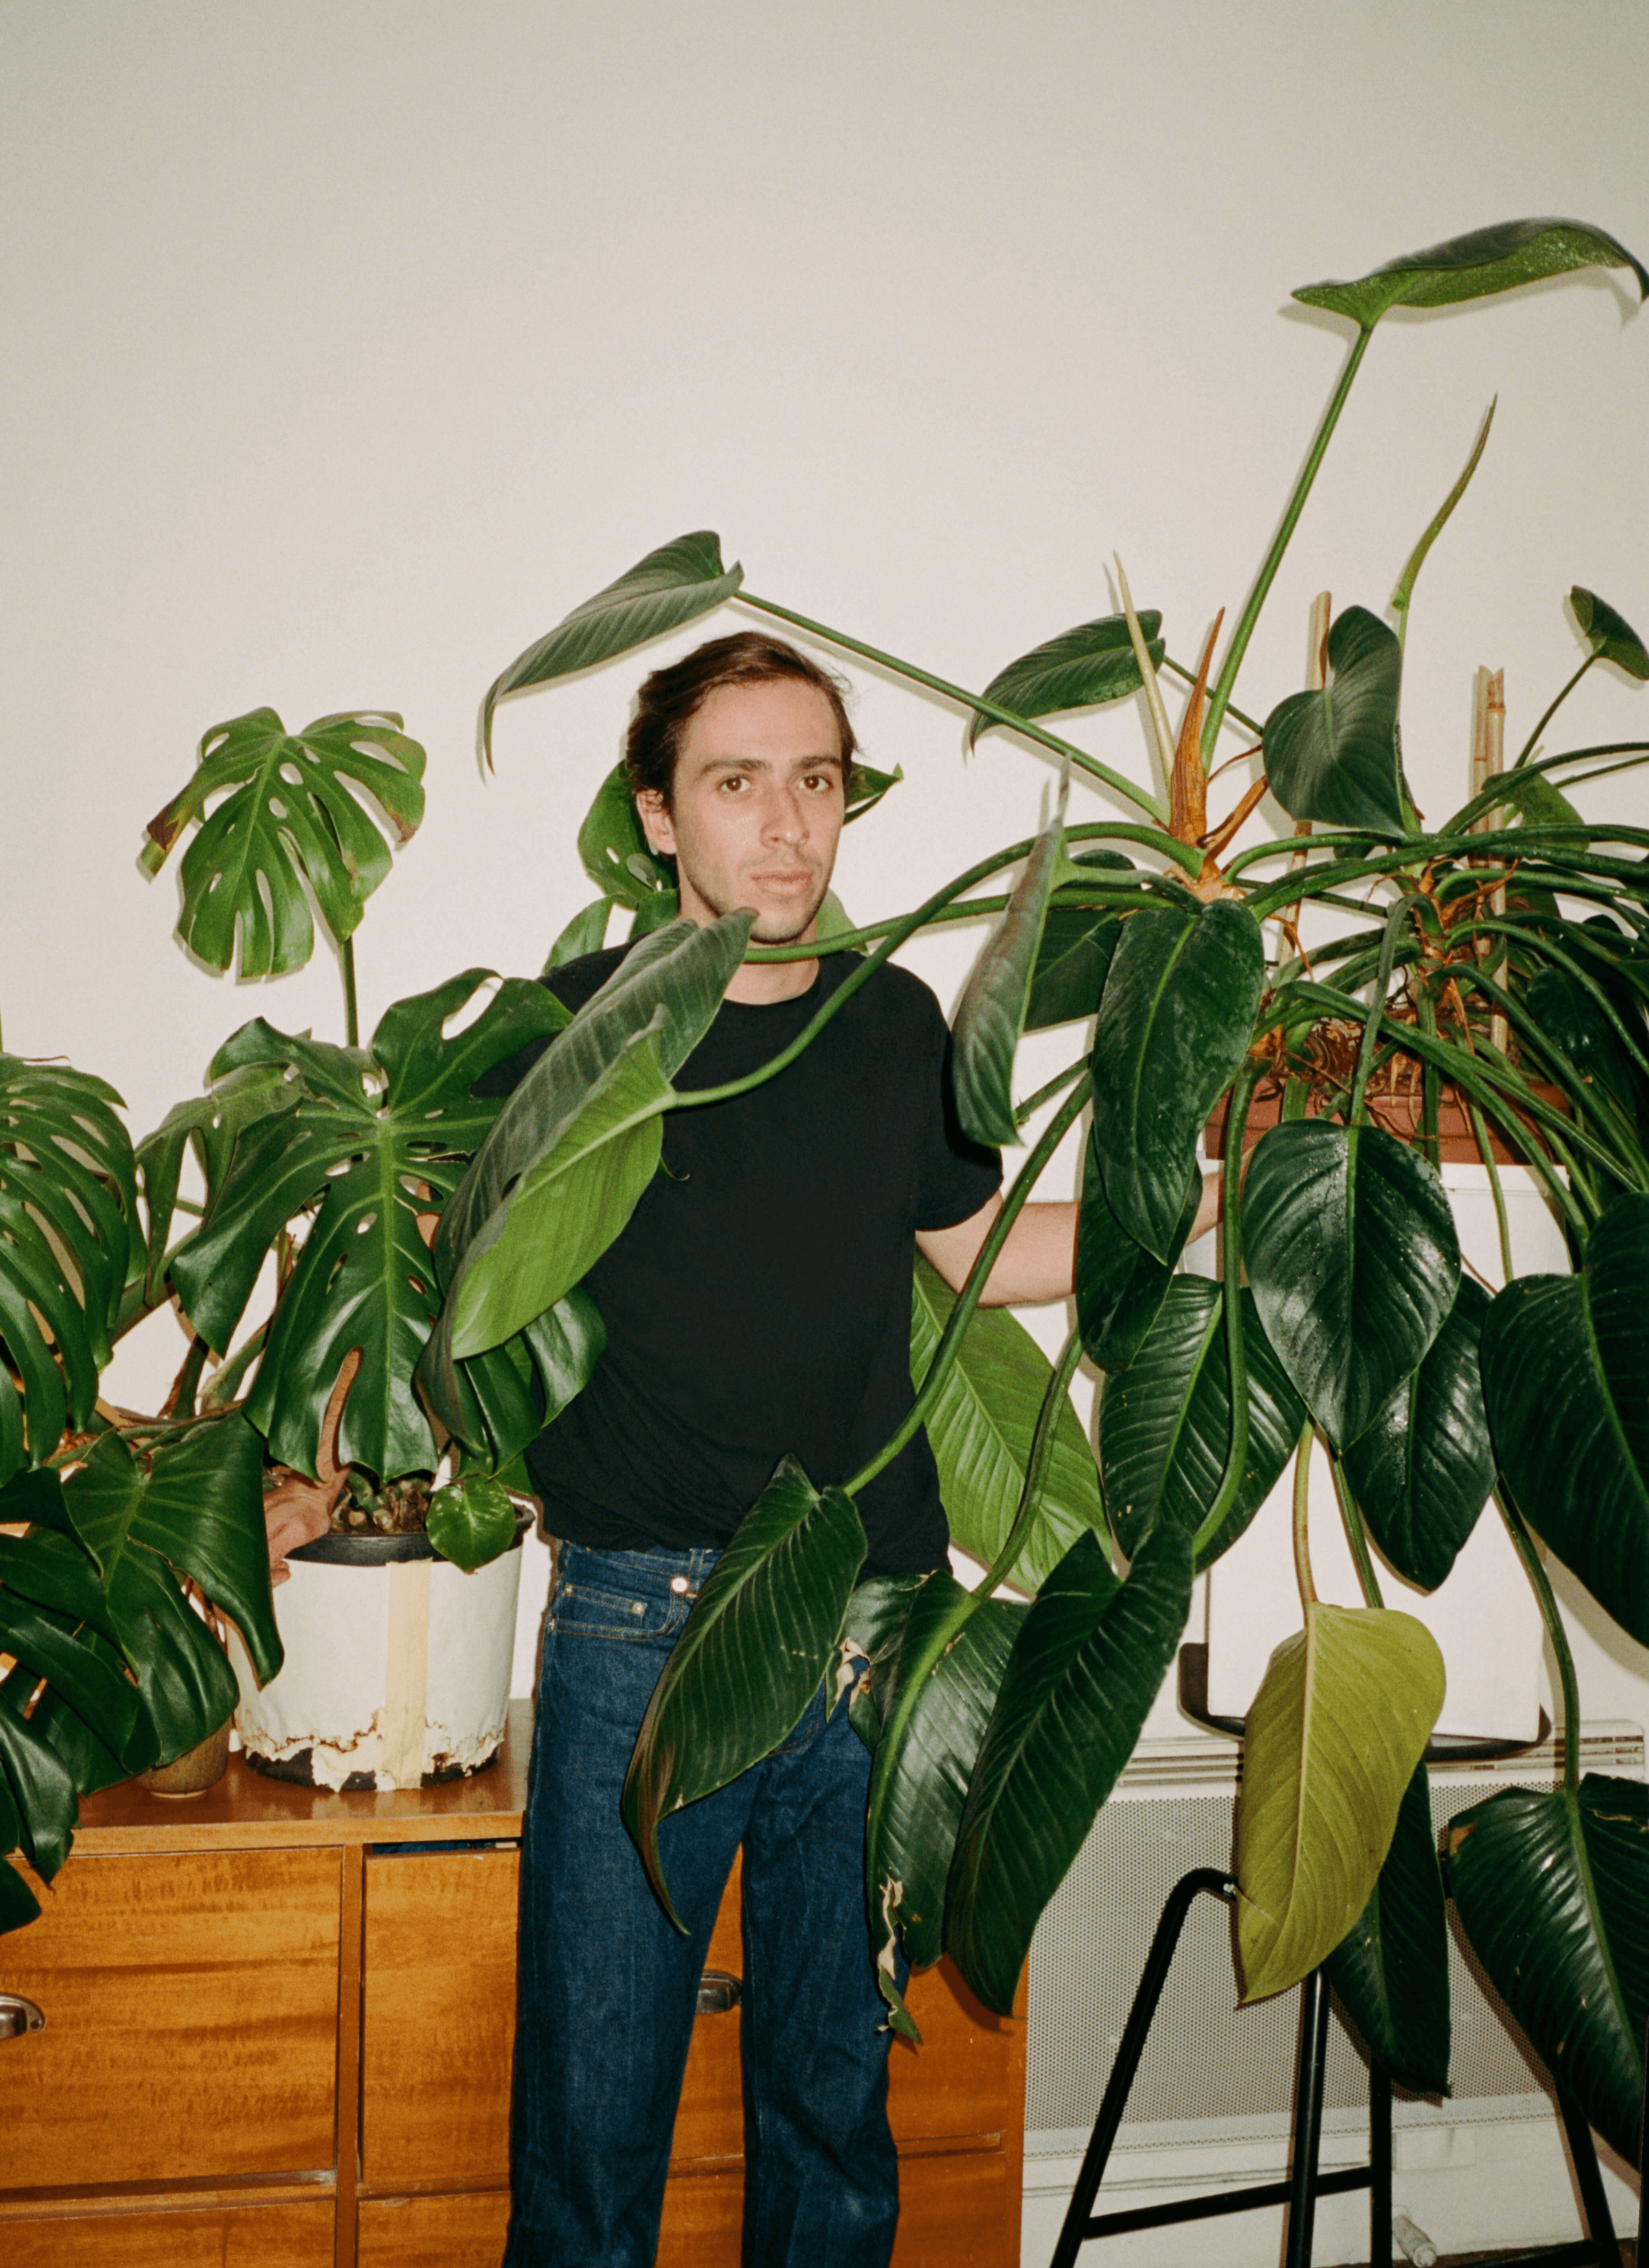 Toni wears a black t-shirt and blue jeans having a photoshoot with his plants - monstera and Philodendron erubescens while standing in front of a cupboard.